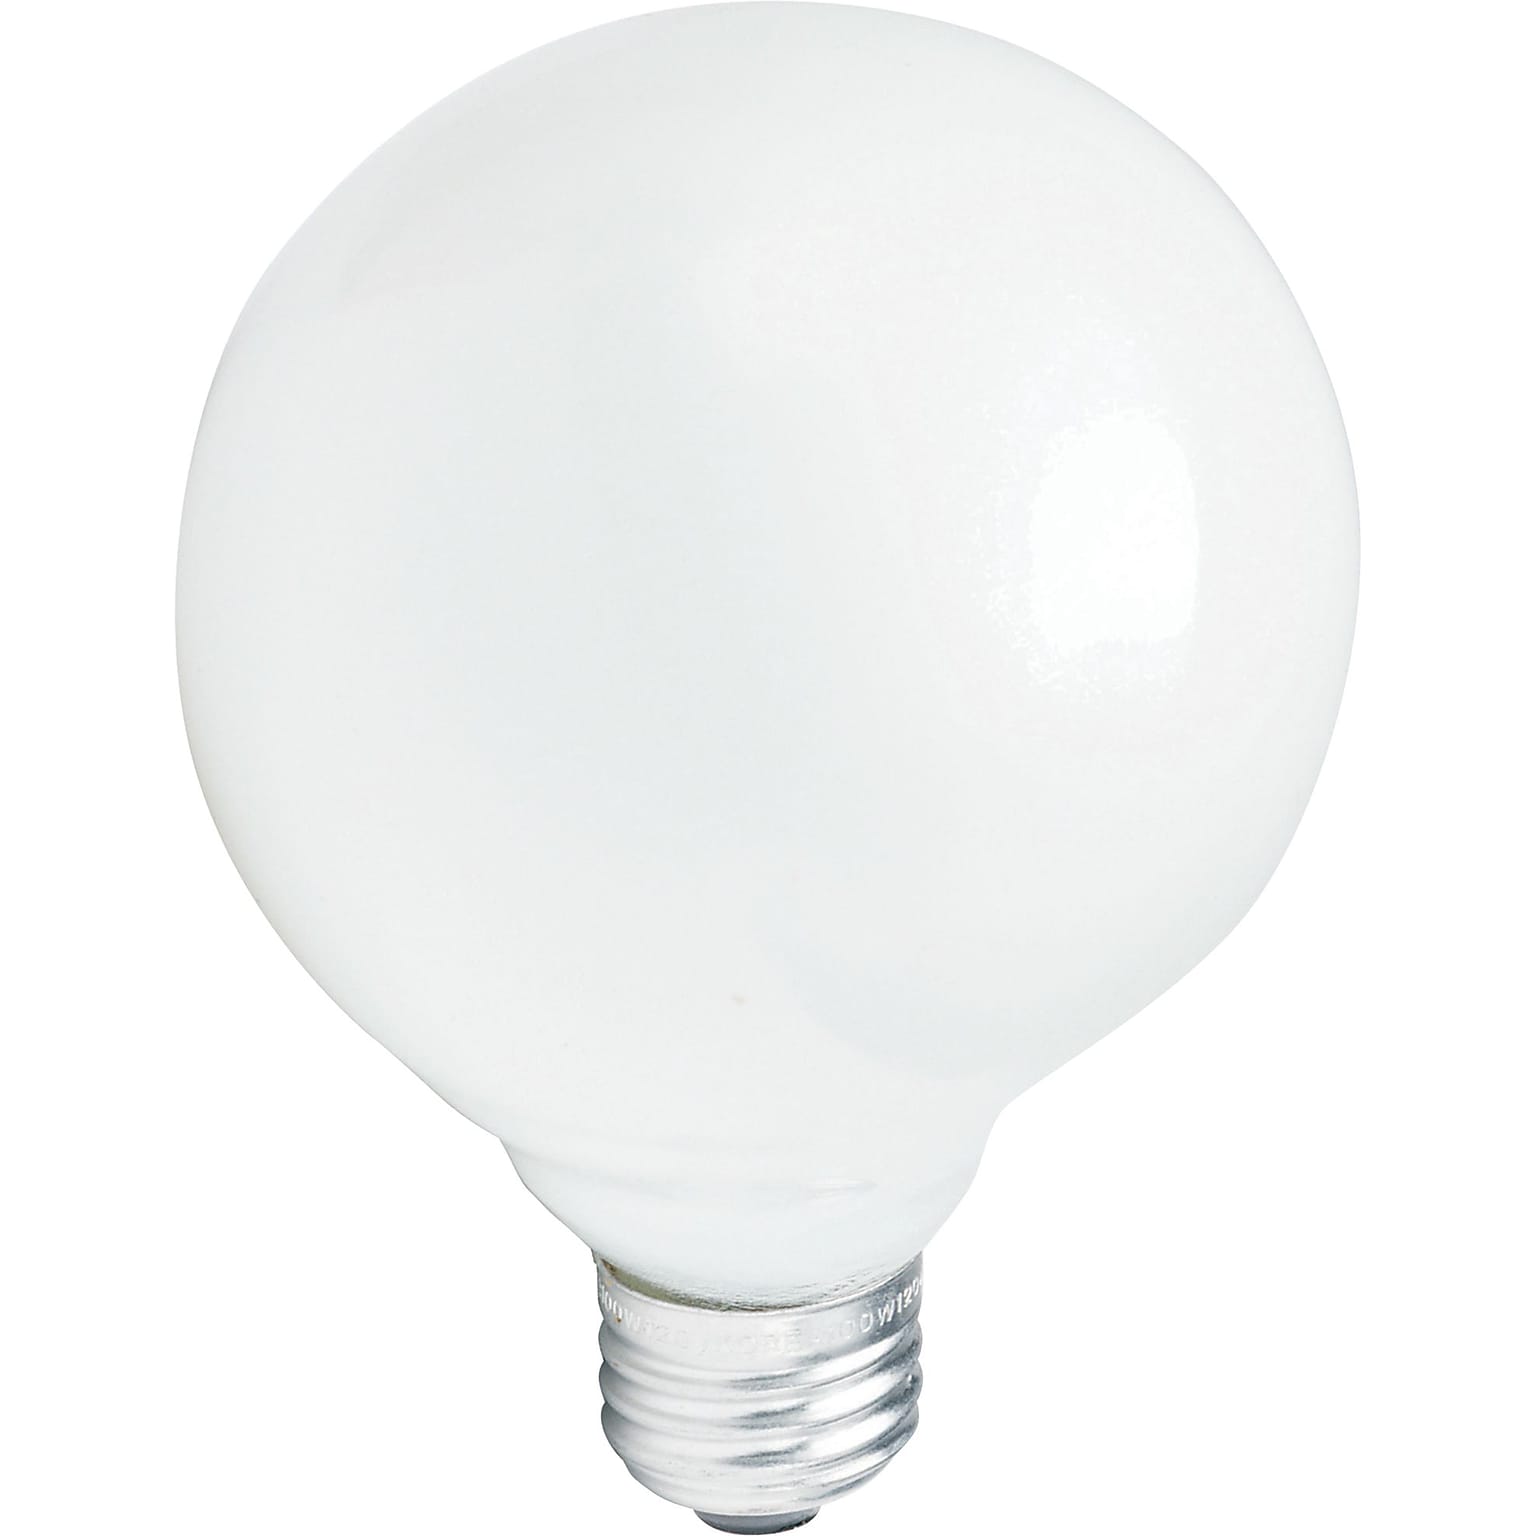 Philips Incandescent Frosted G25 Globe Lamp, 40 Watts, 12/Carton (167460)